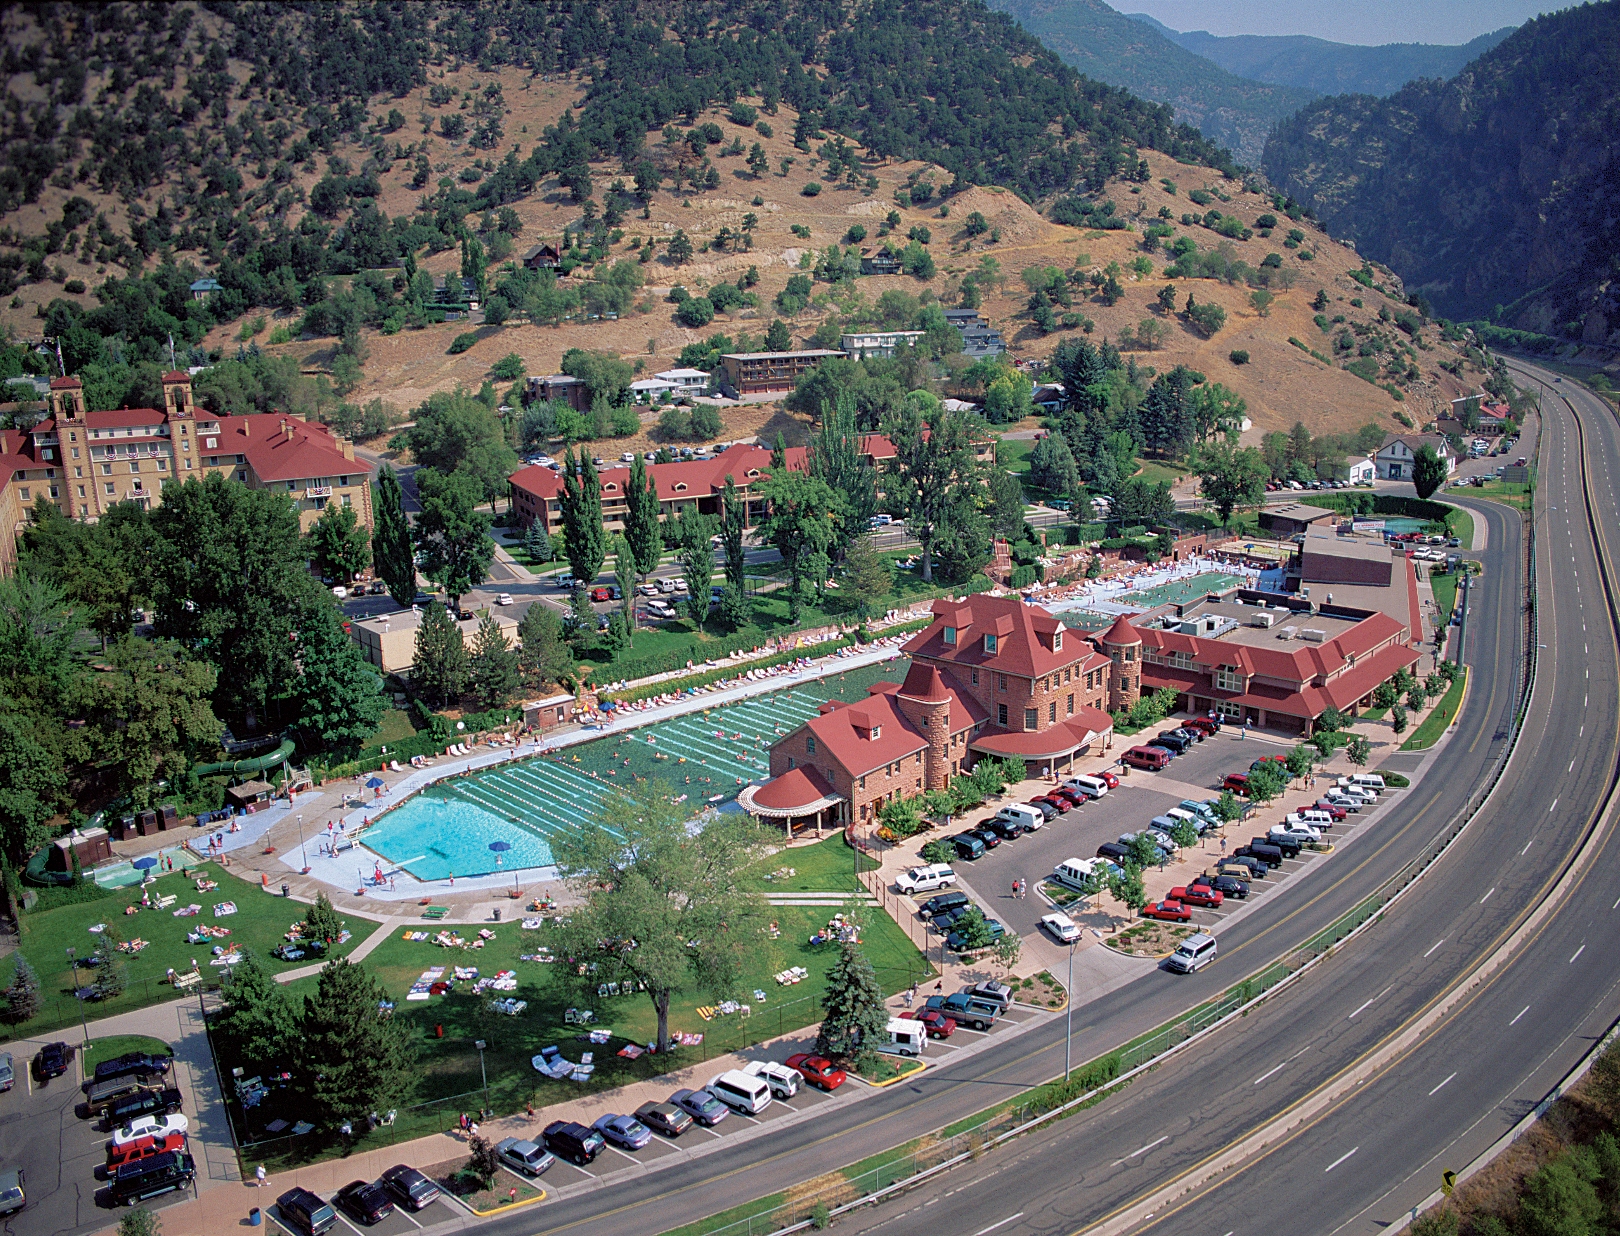 Glenwood Hot Springs, largest mineral hot springs pool in the world